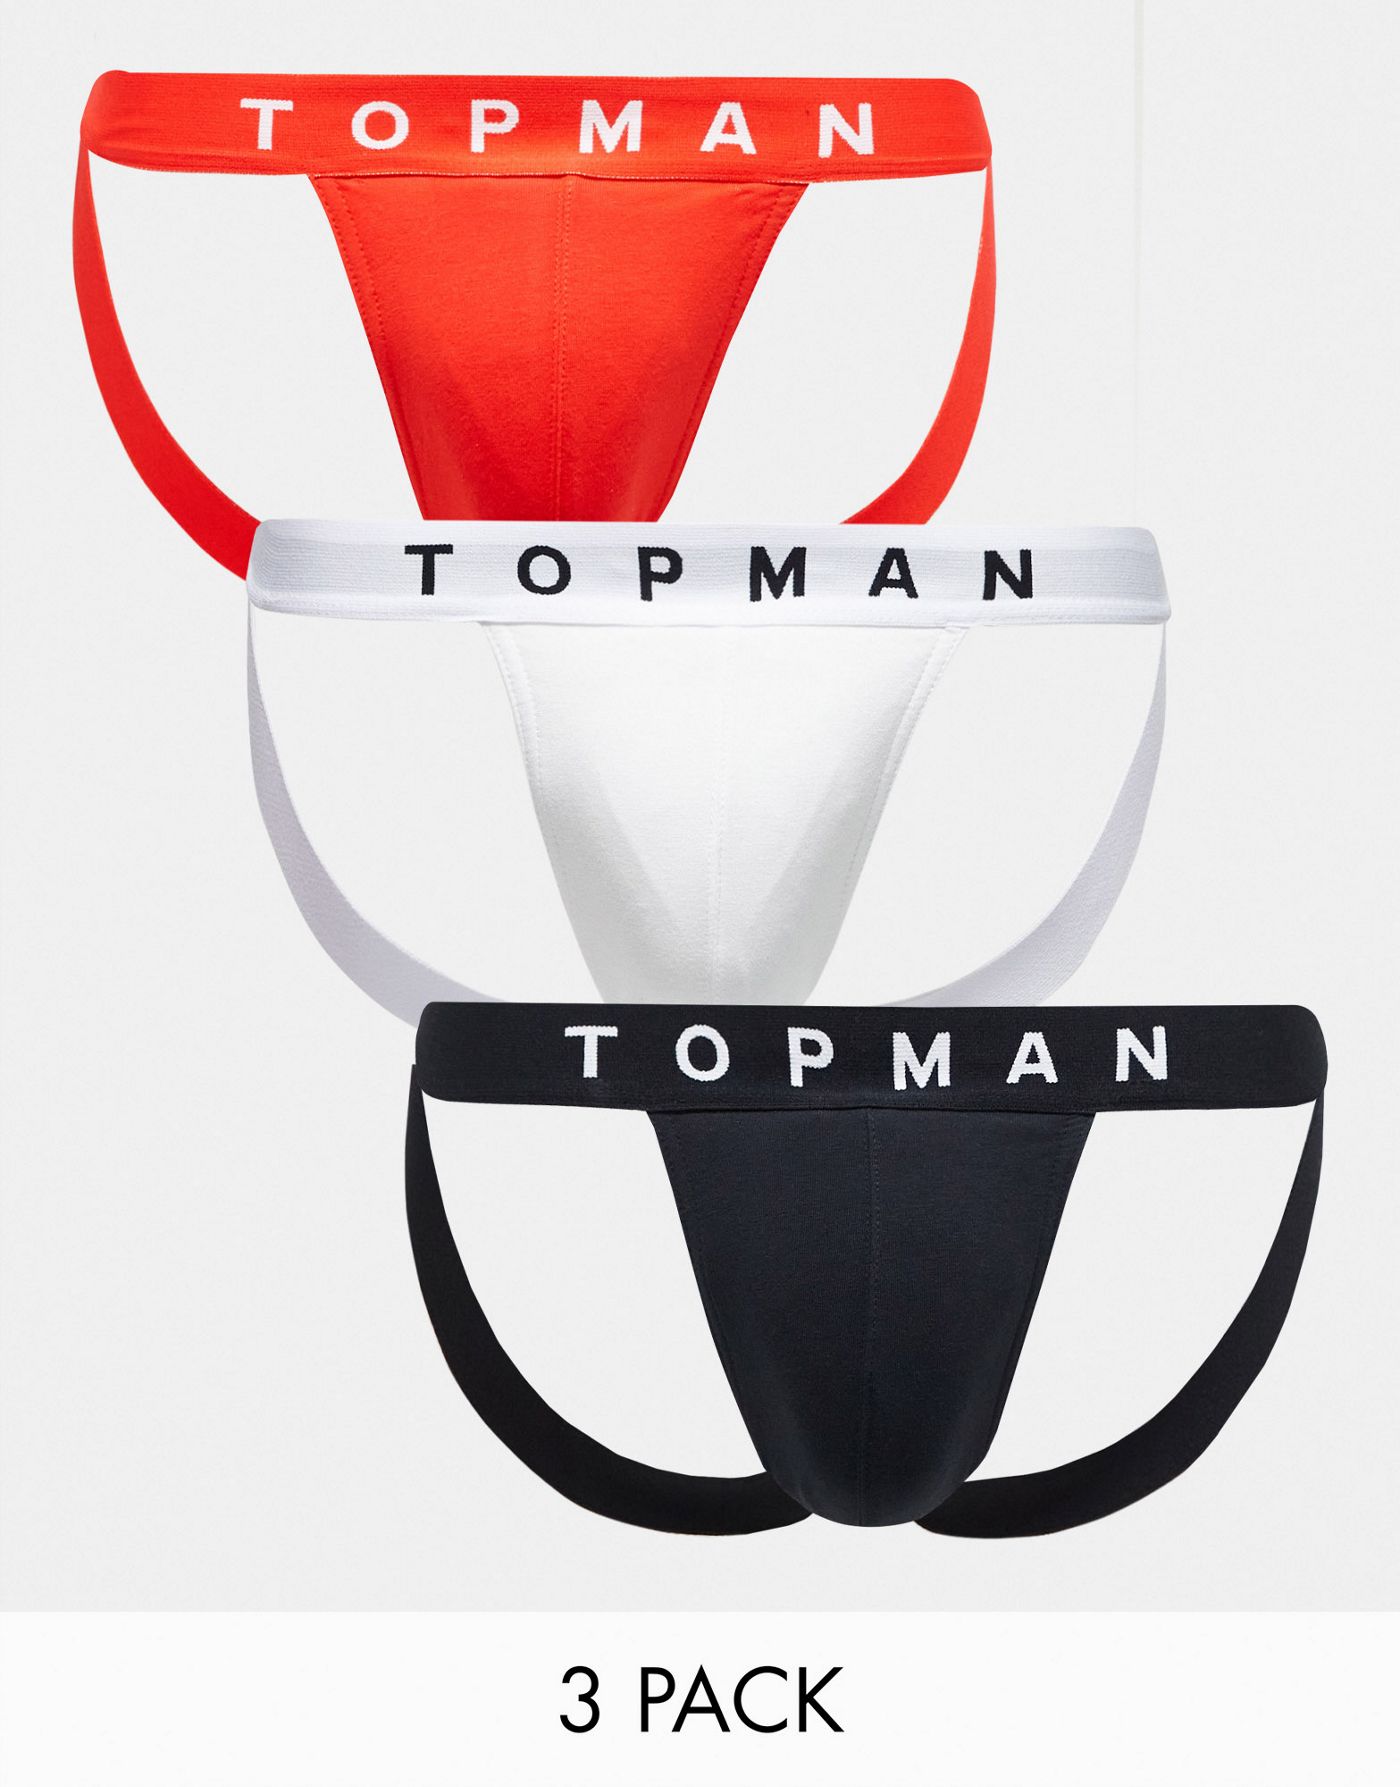 Topman 3 pack jocks in white, black and red with white waistbands